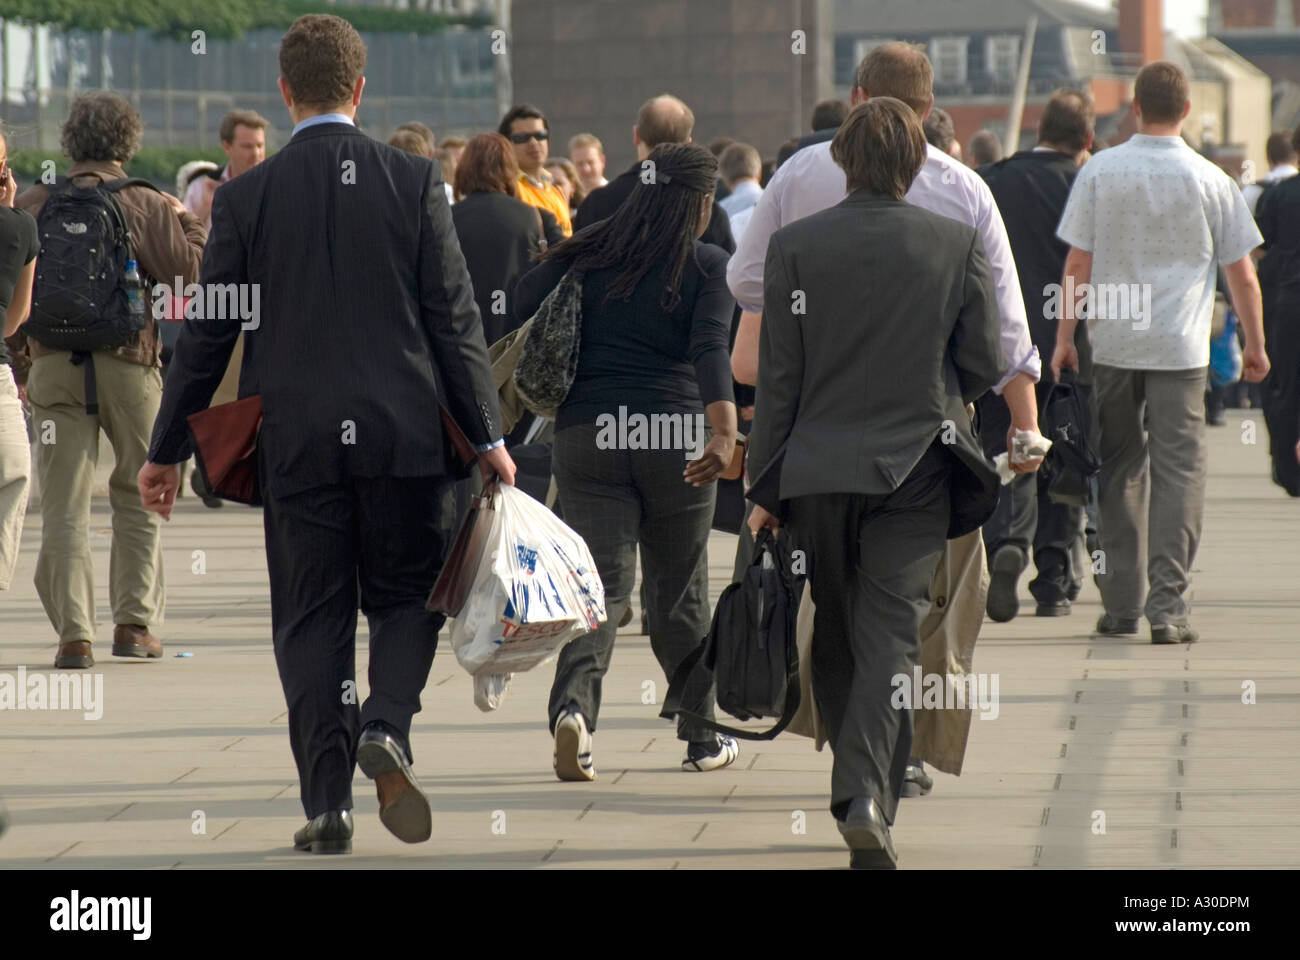 Evening rush hour group of office worker people on London Bridge walking from City of London to railway station for trains on south side England UK Stock Photo